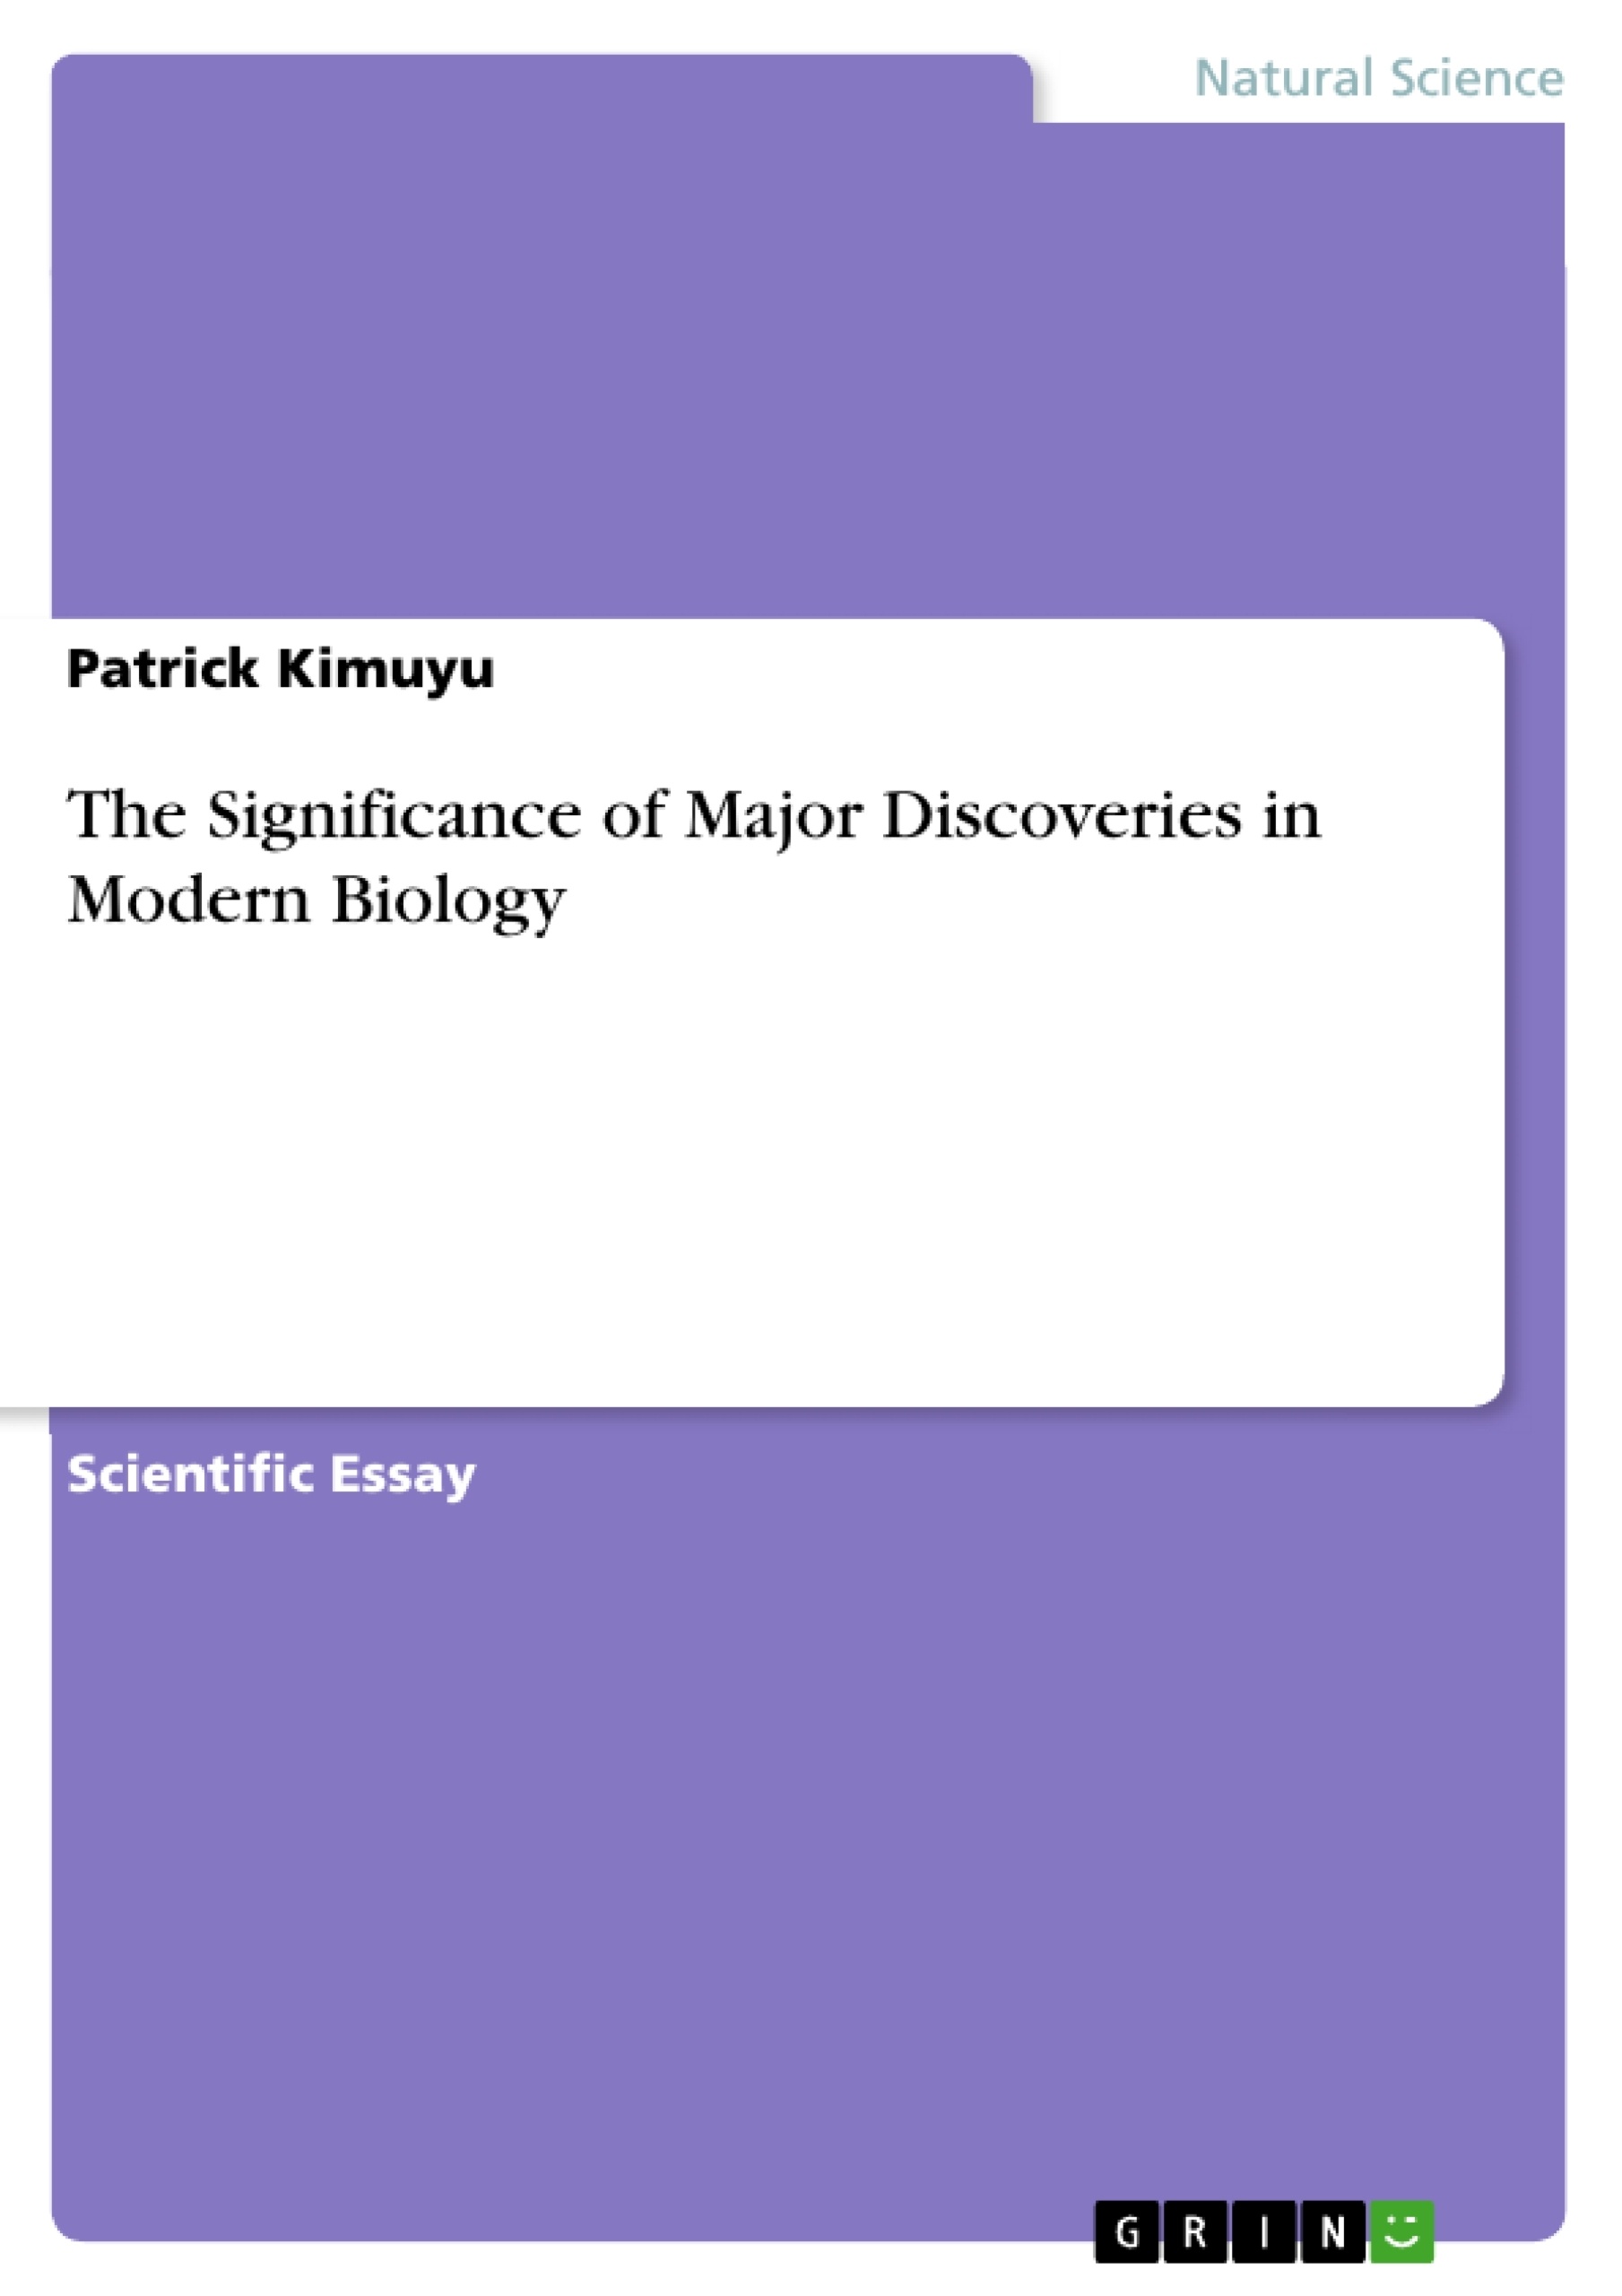 Título: The Significance of Major Discoveries in Modern Biology